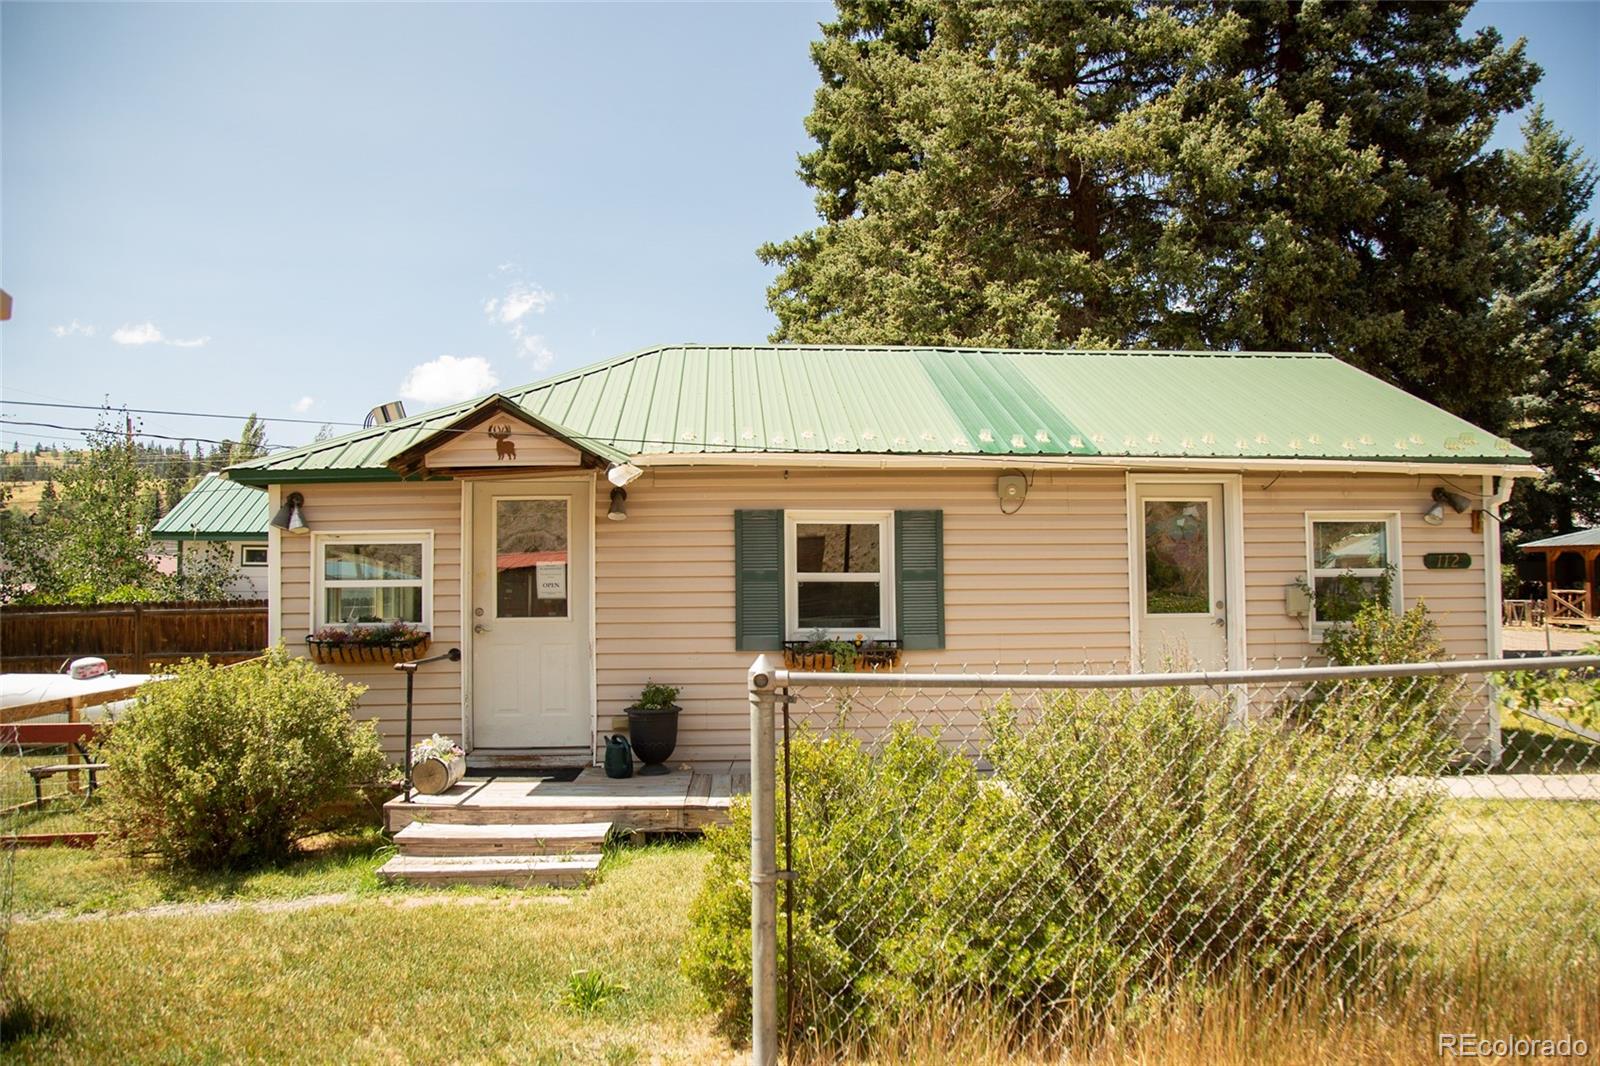 112 e 1st street, Creede sold home. Closed on 2024-06-17 for $269,000.